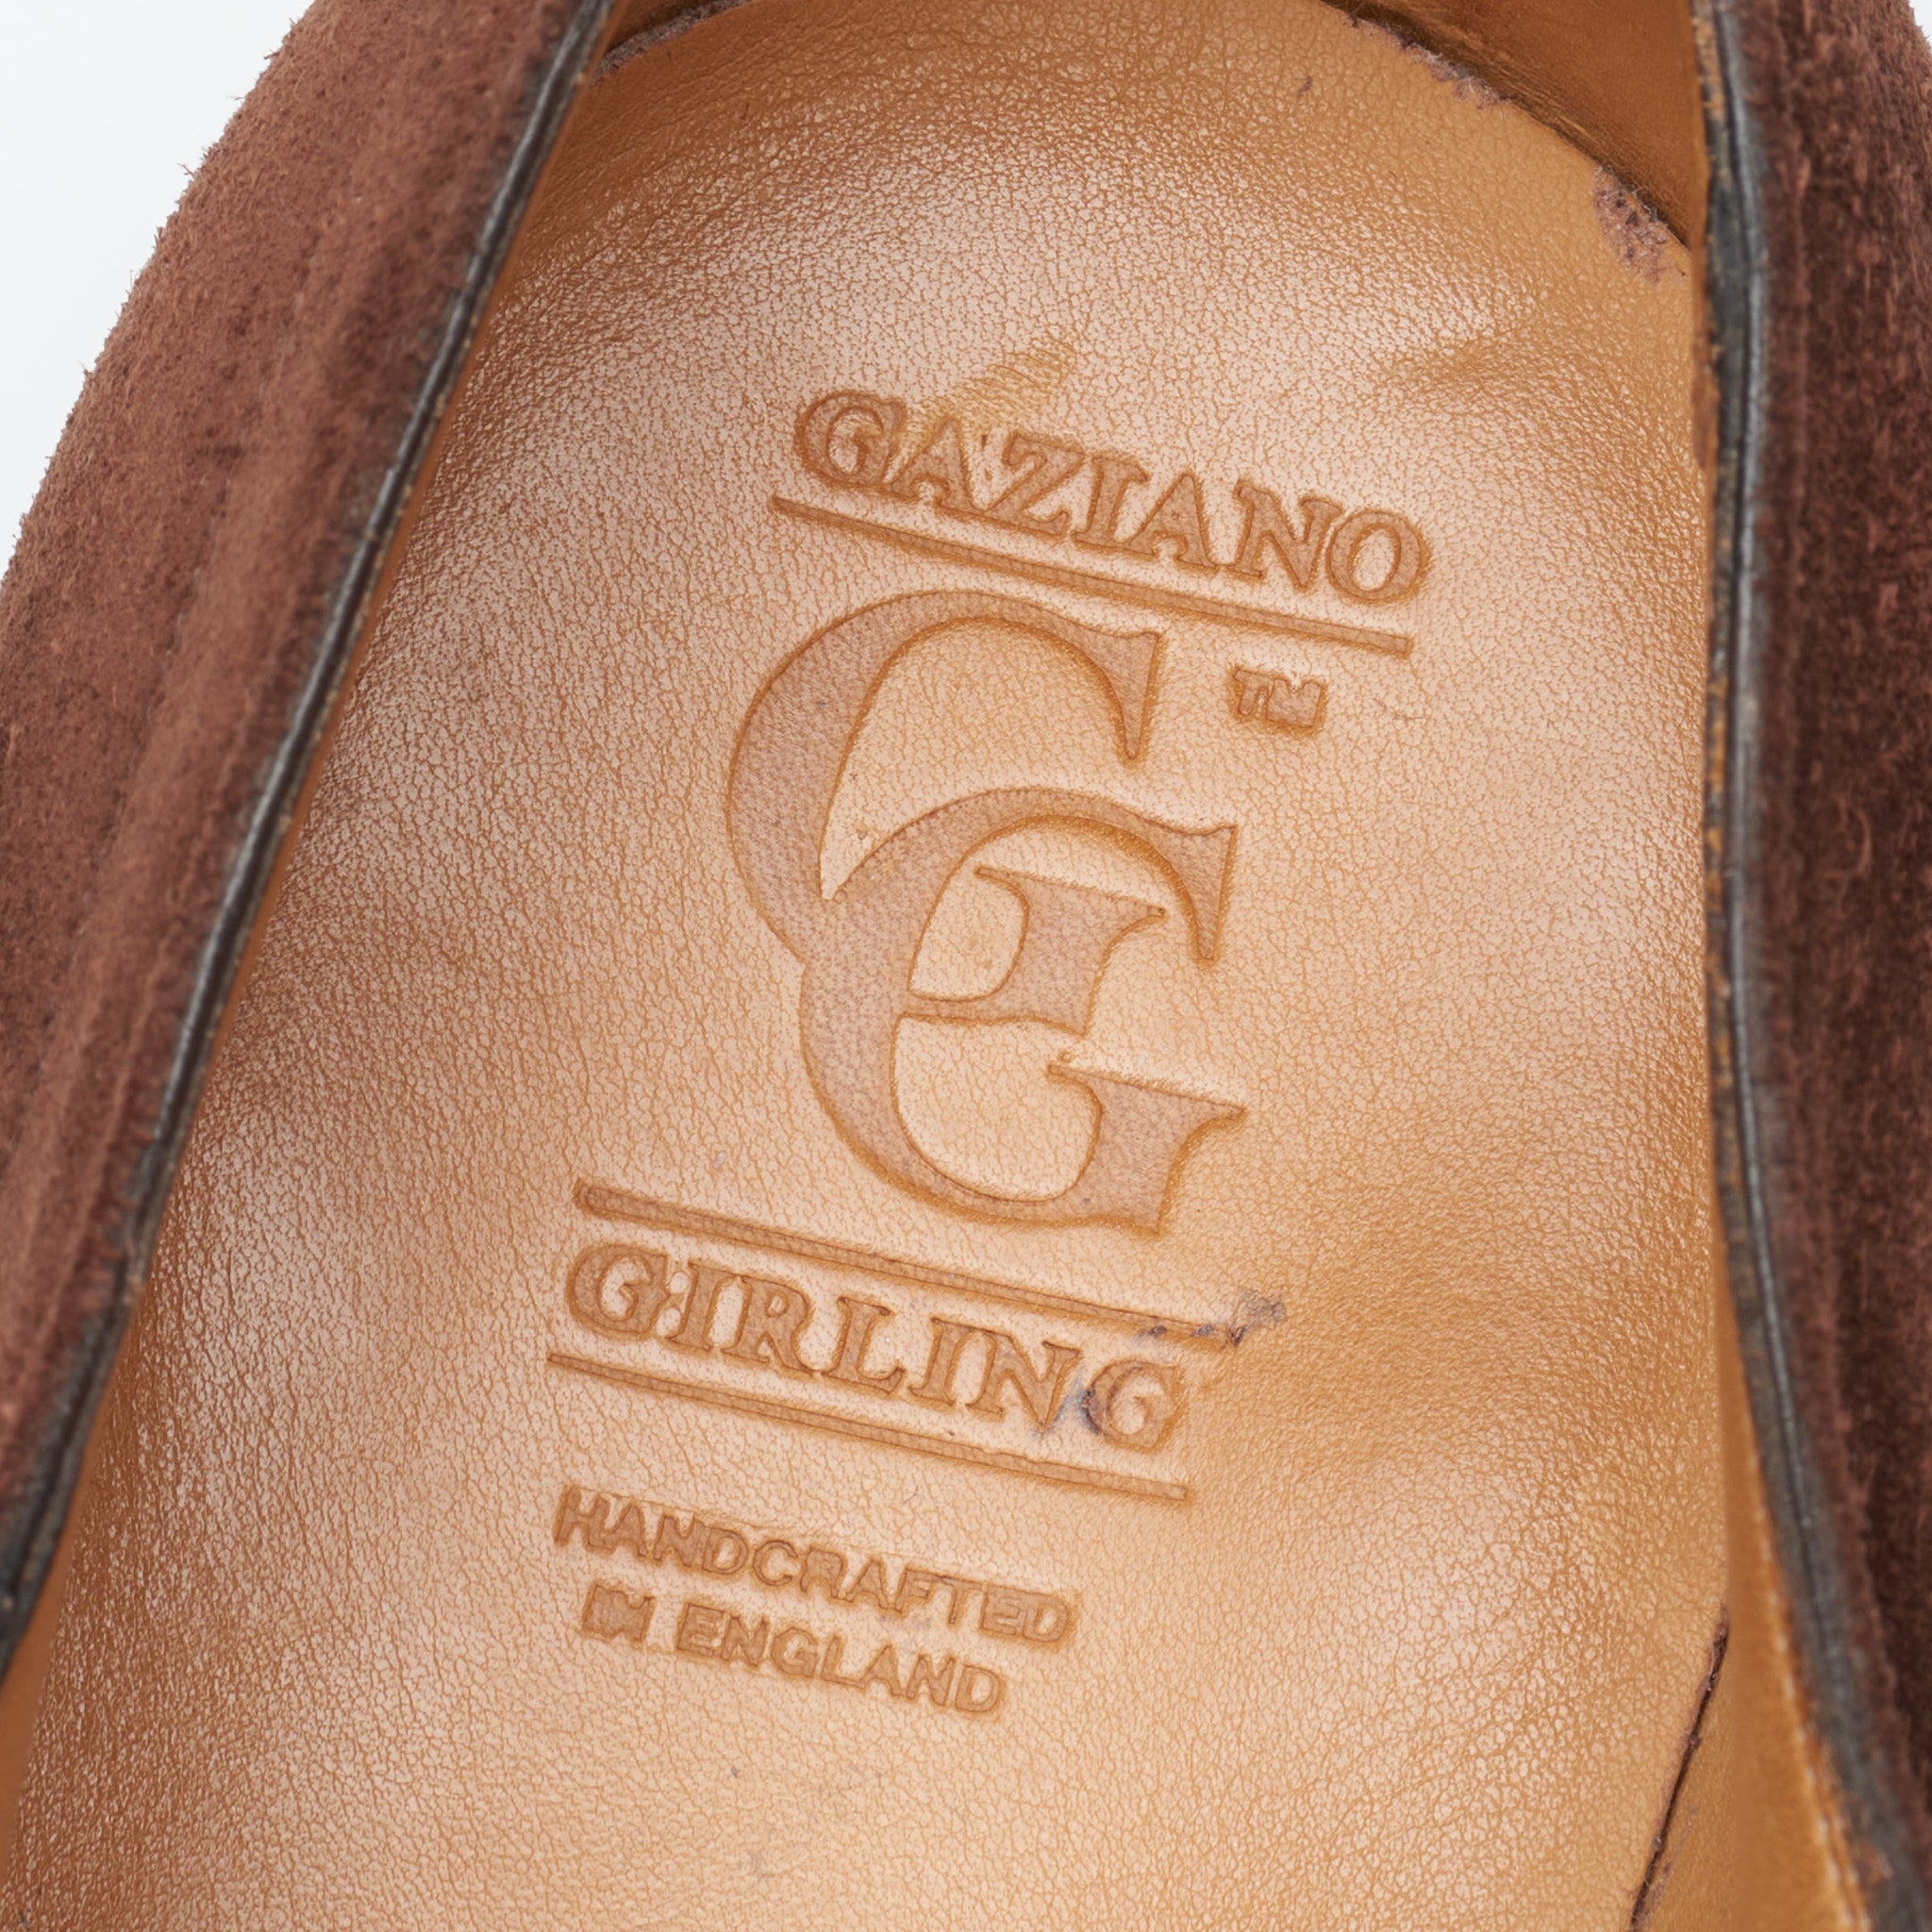 GAZIANO & GIRLING "Hove" Brown Suede Leather Derby Dress Shoes 8E US 8.5 Last MH71 GAZIANO & GIRLING